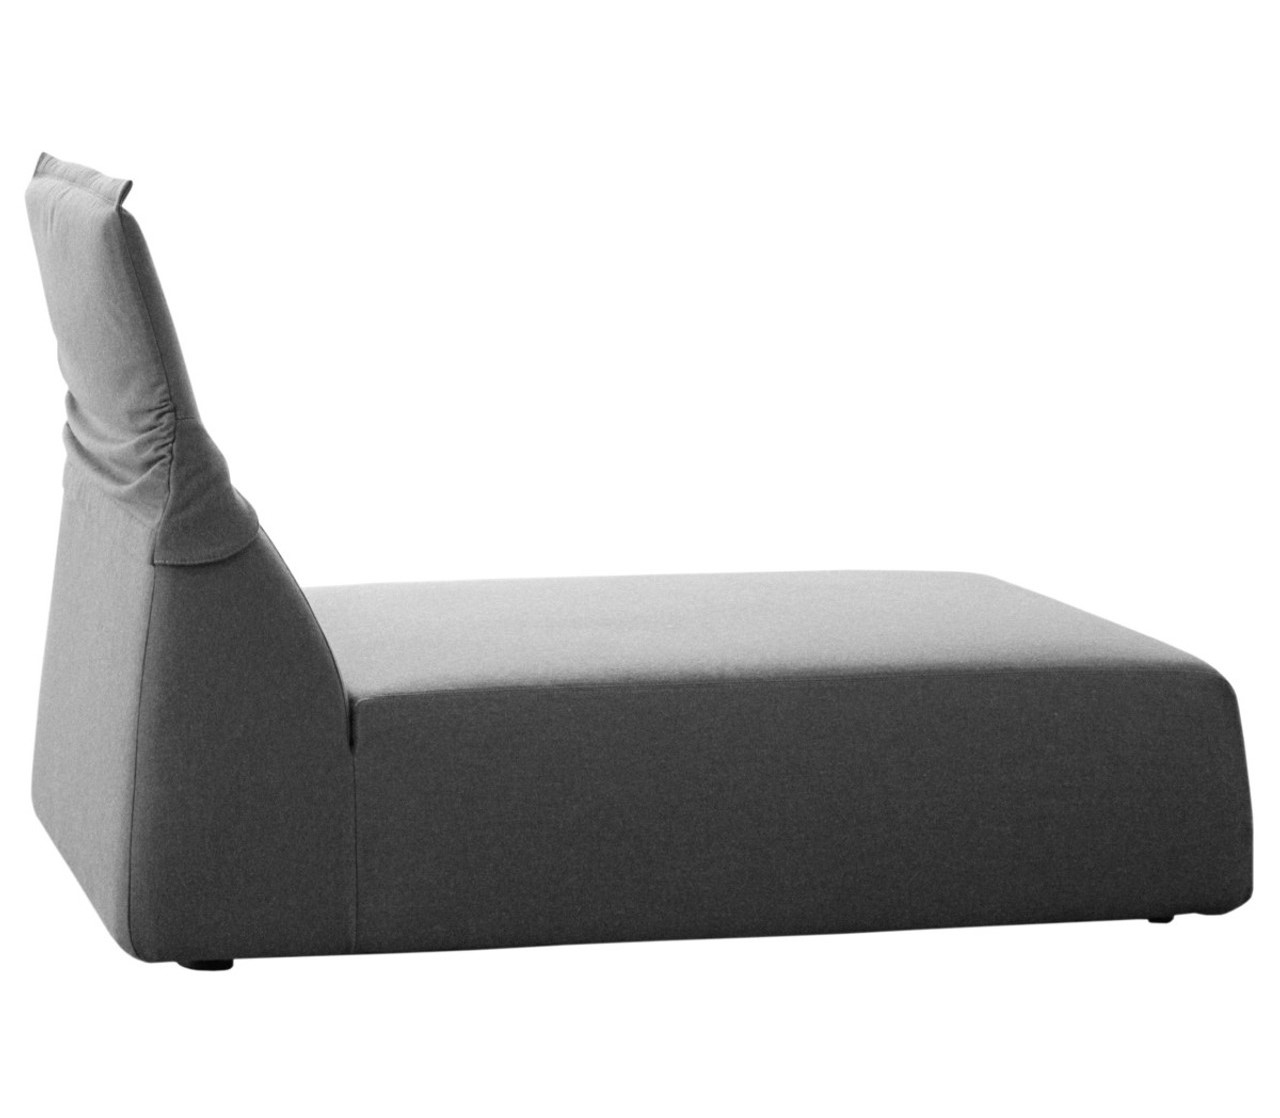 Product Image Highlands Chaise Lounge